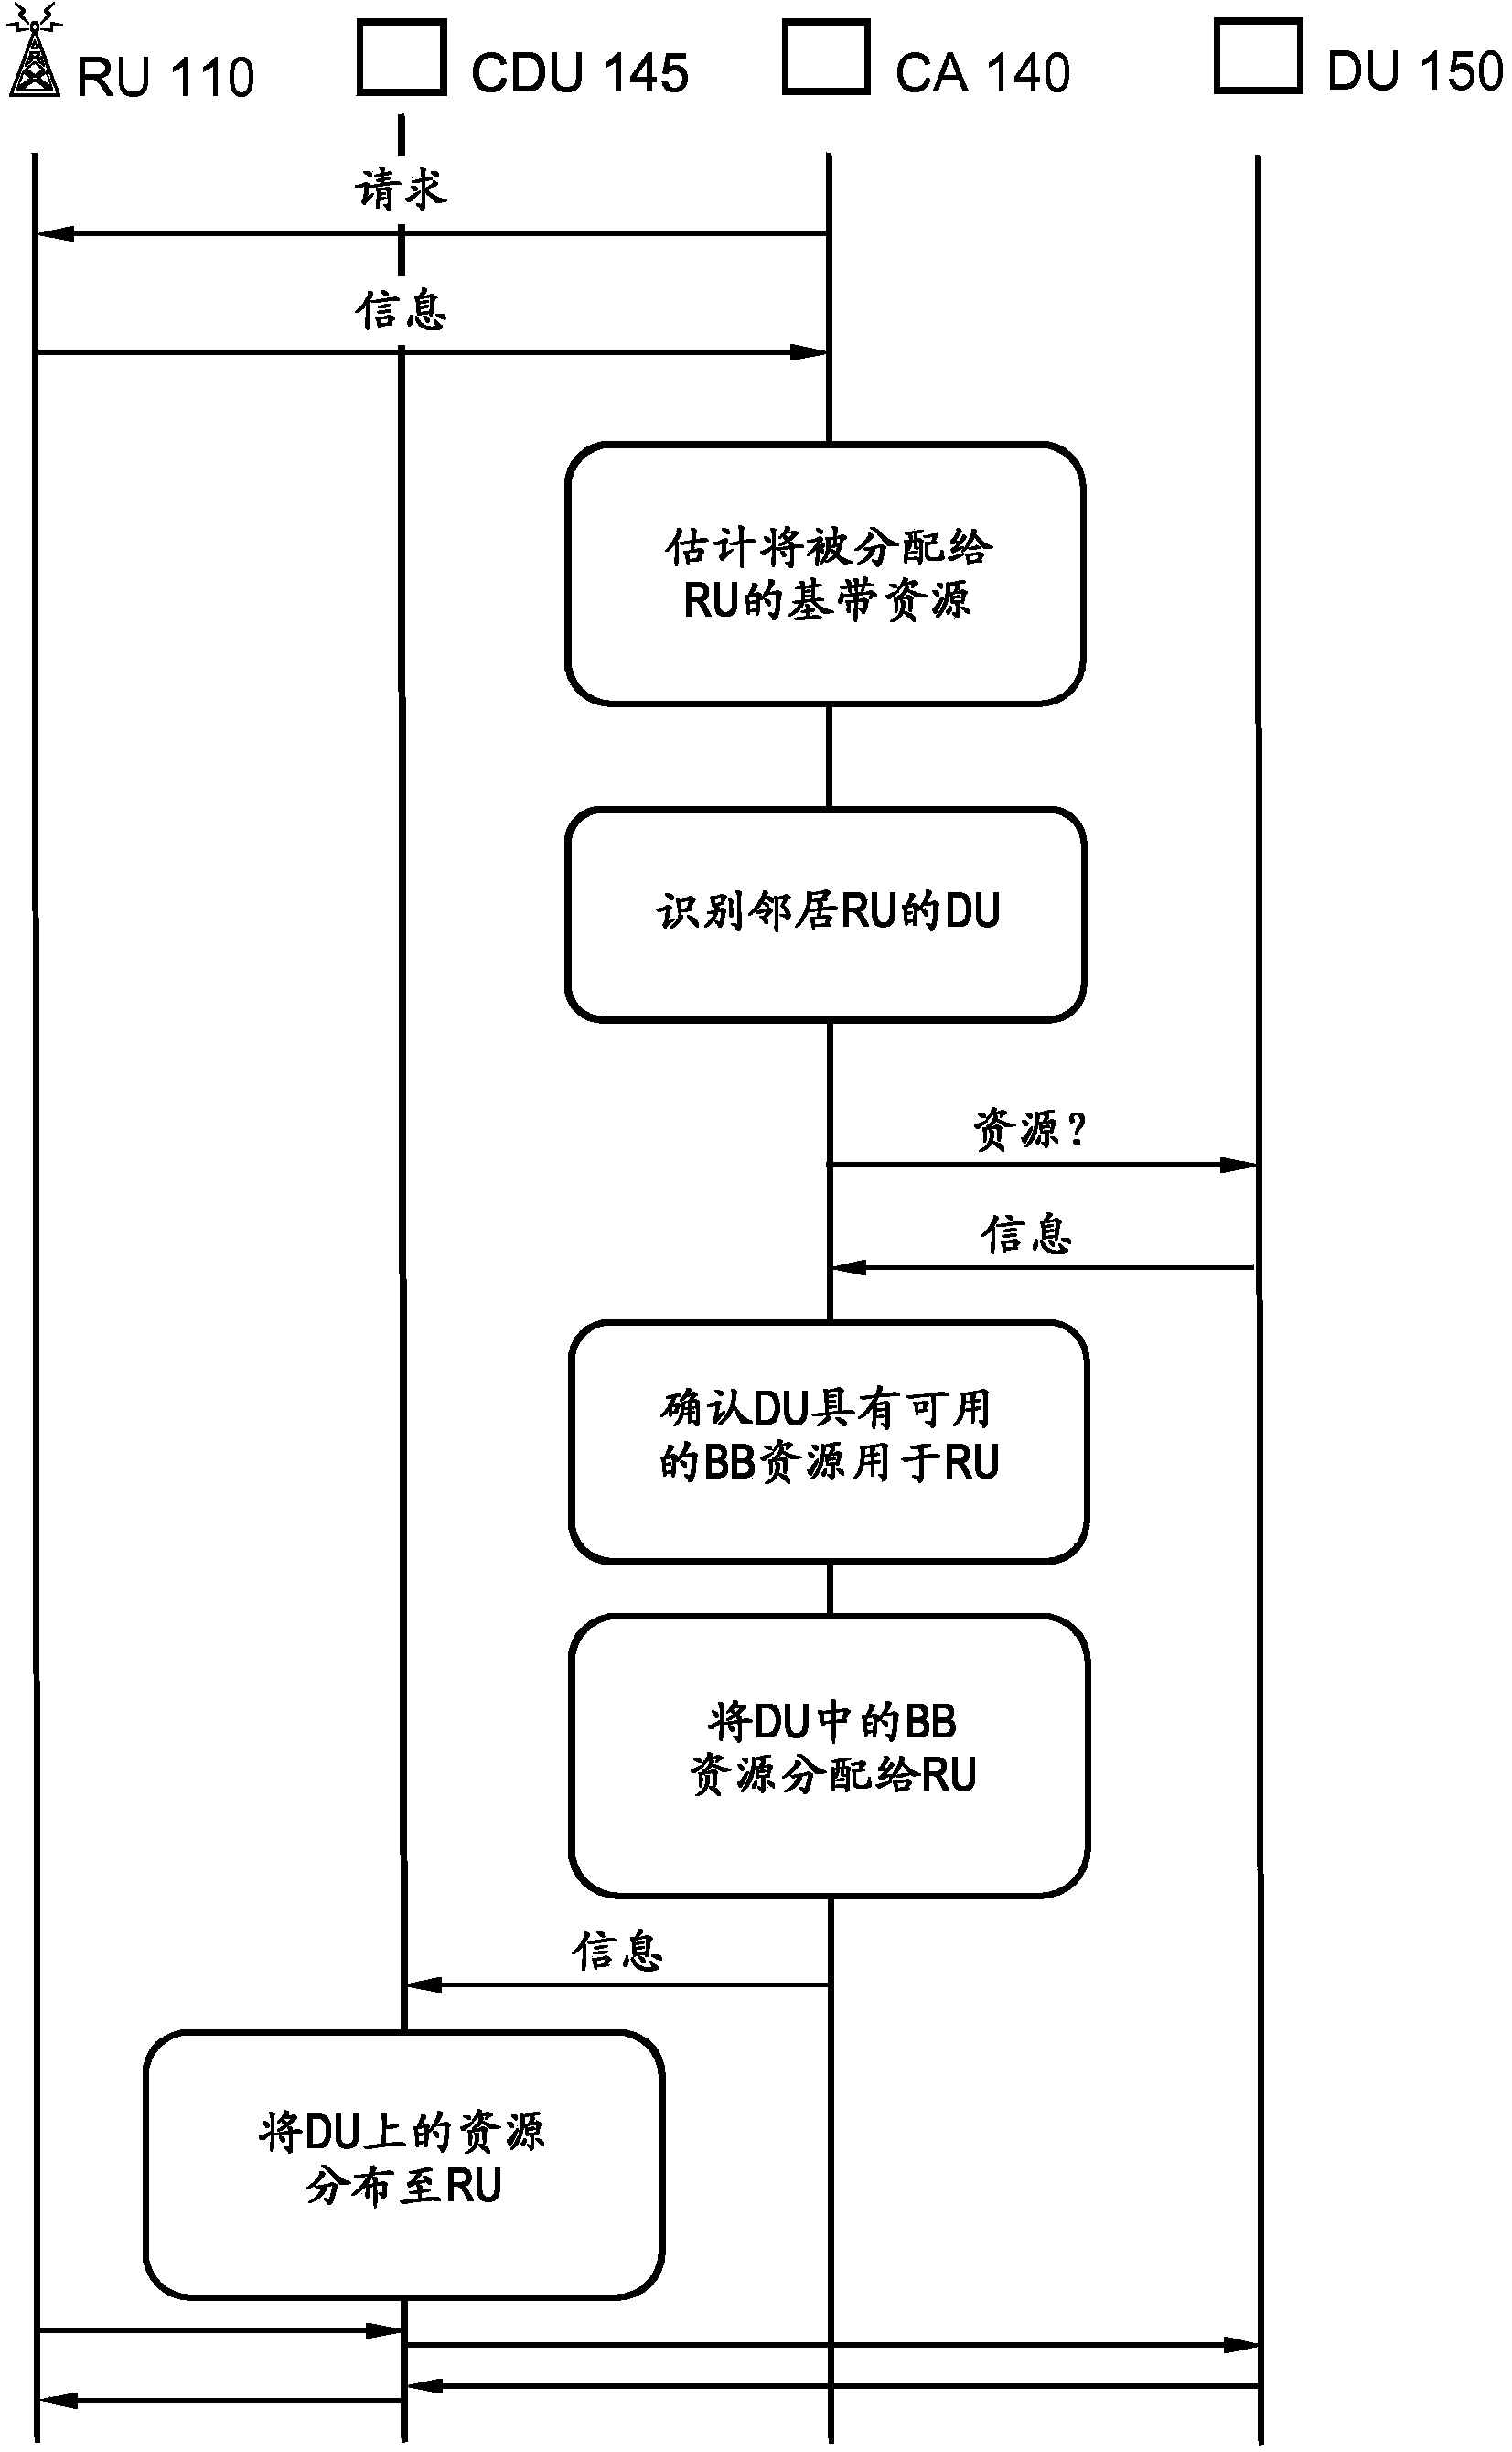 Allocation of baseband resources to a radio unit of a serving cell